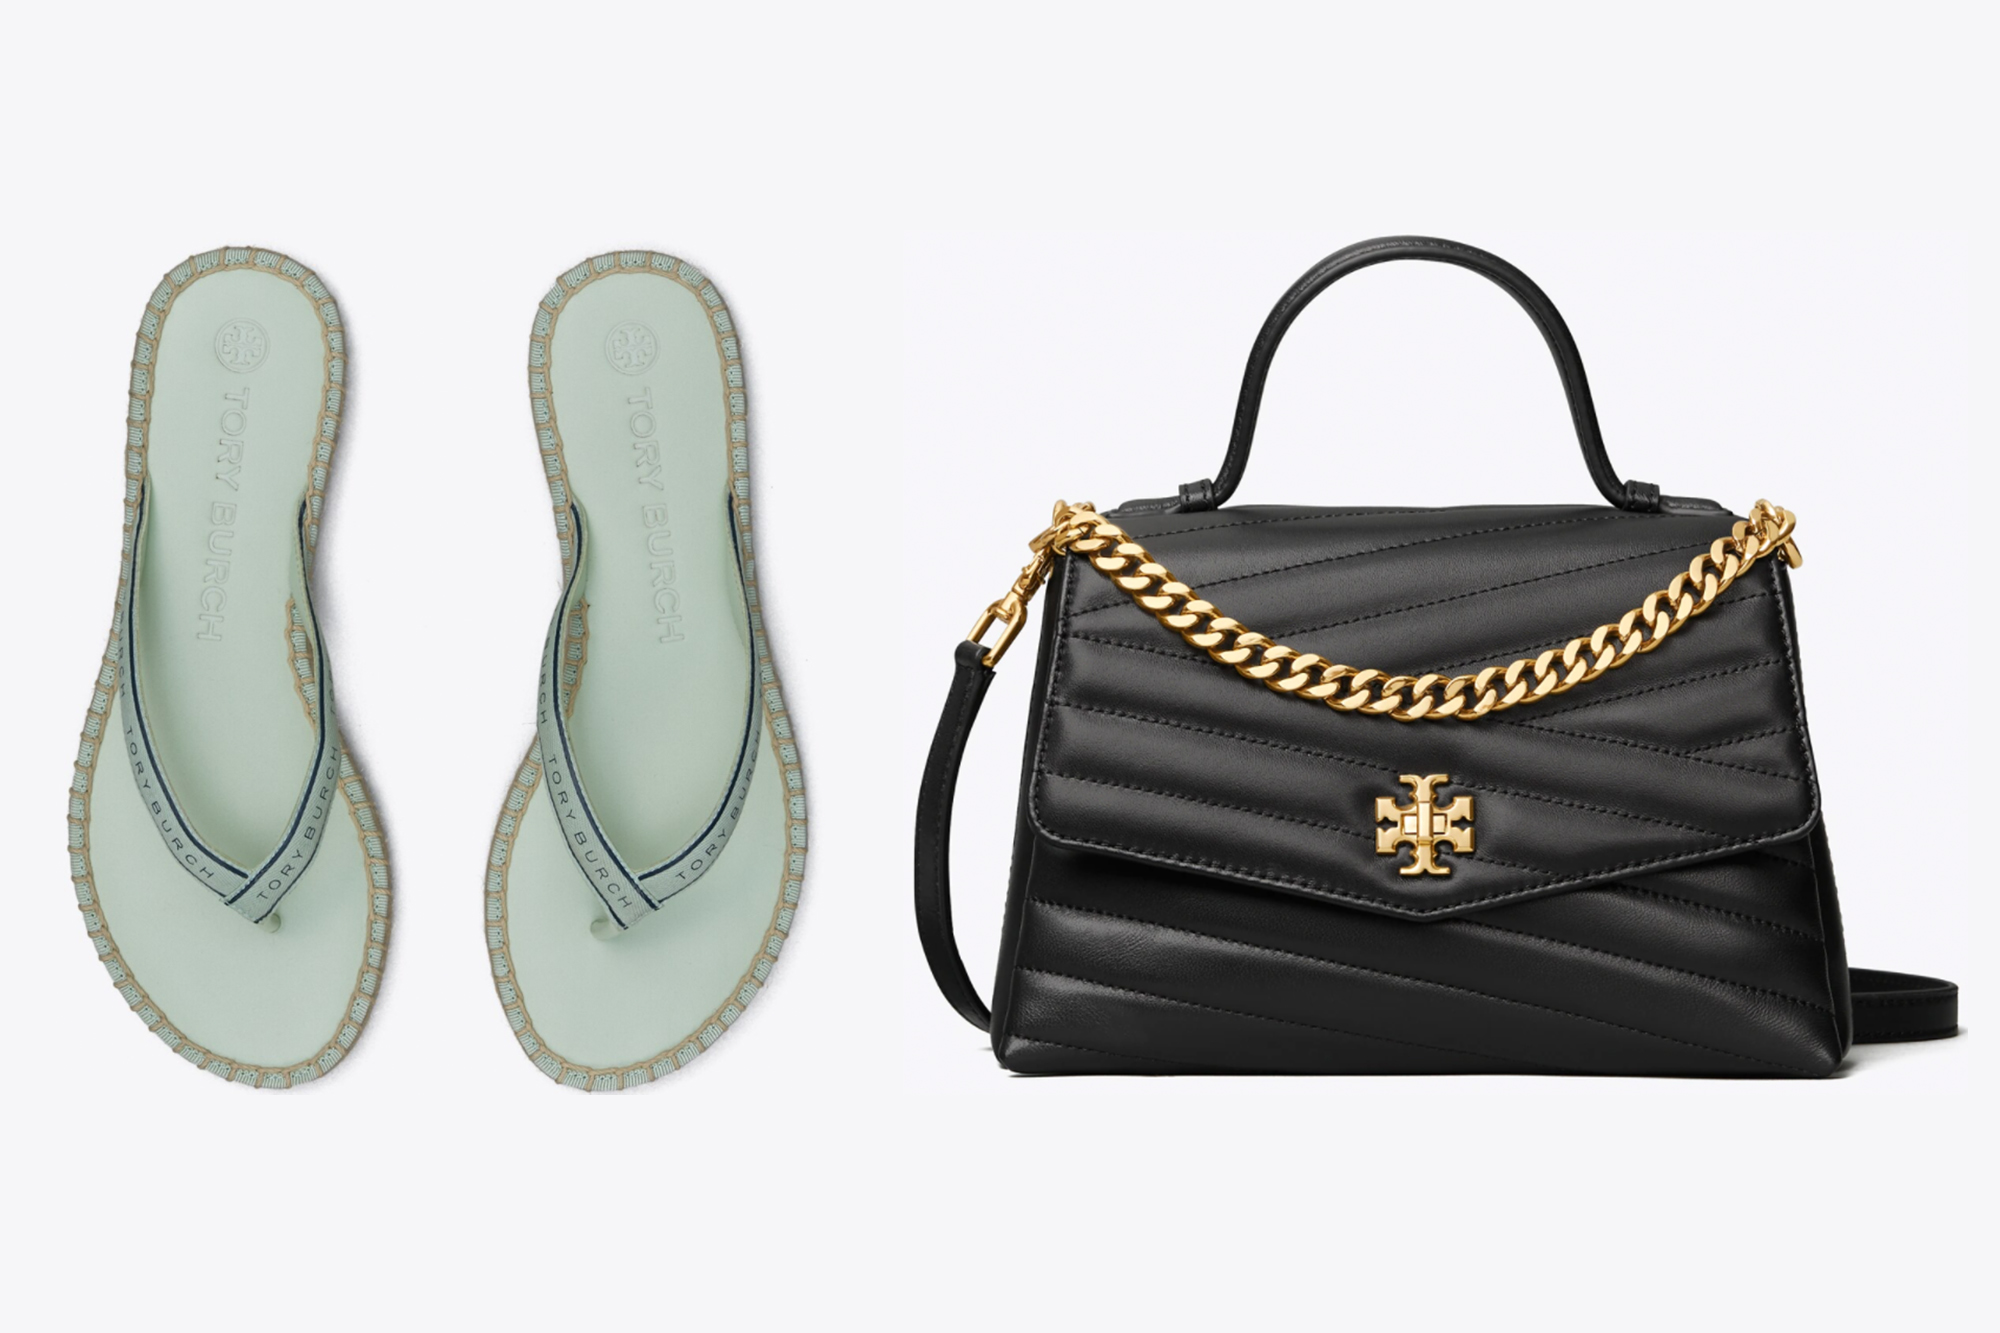 Tory Burch Private Sale: Shop Our Absolute Favorite Picks